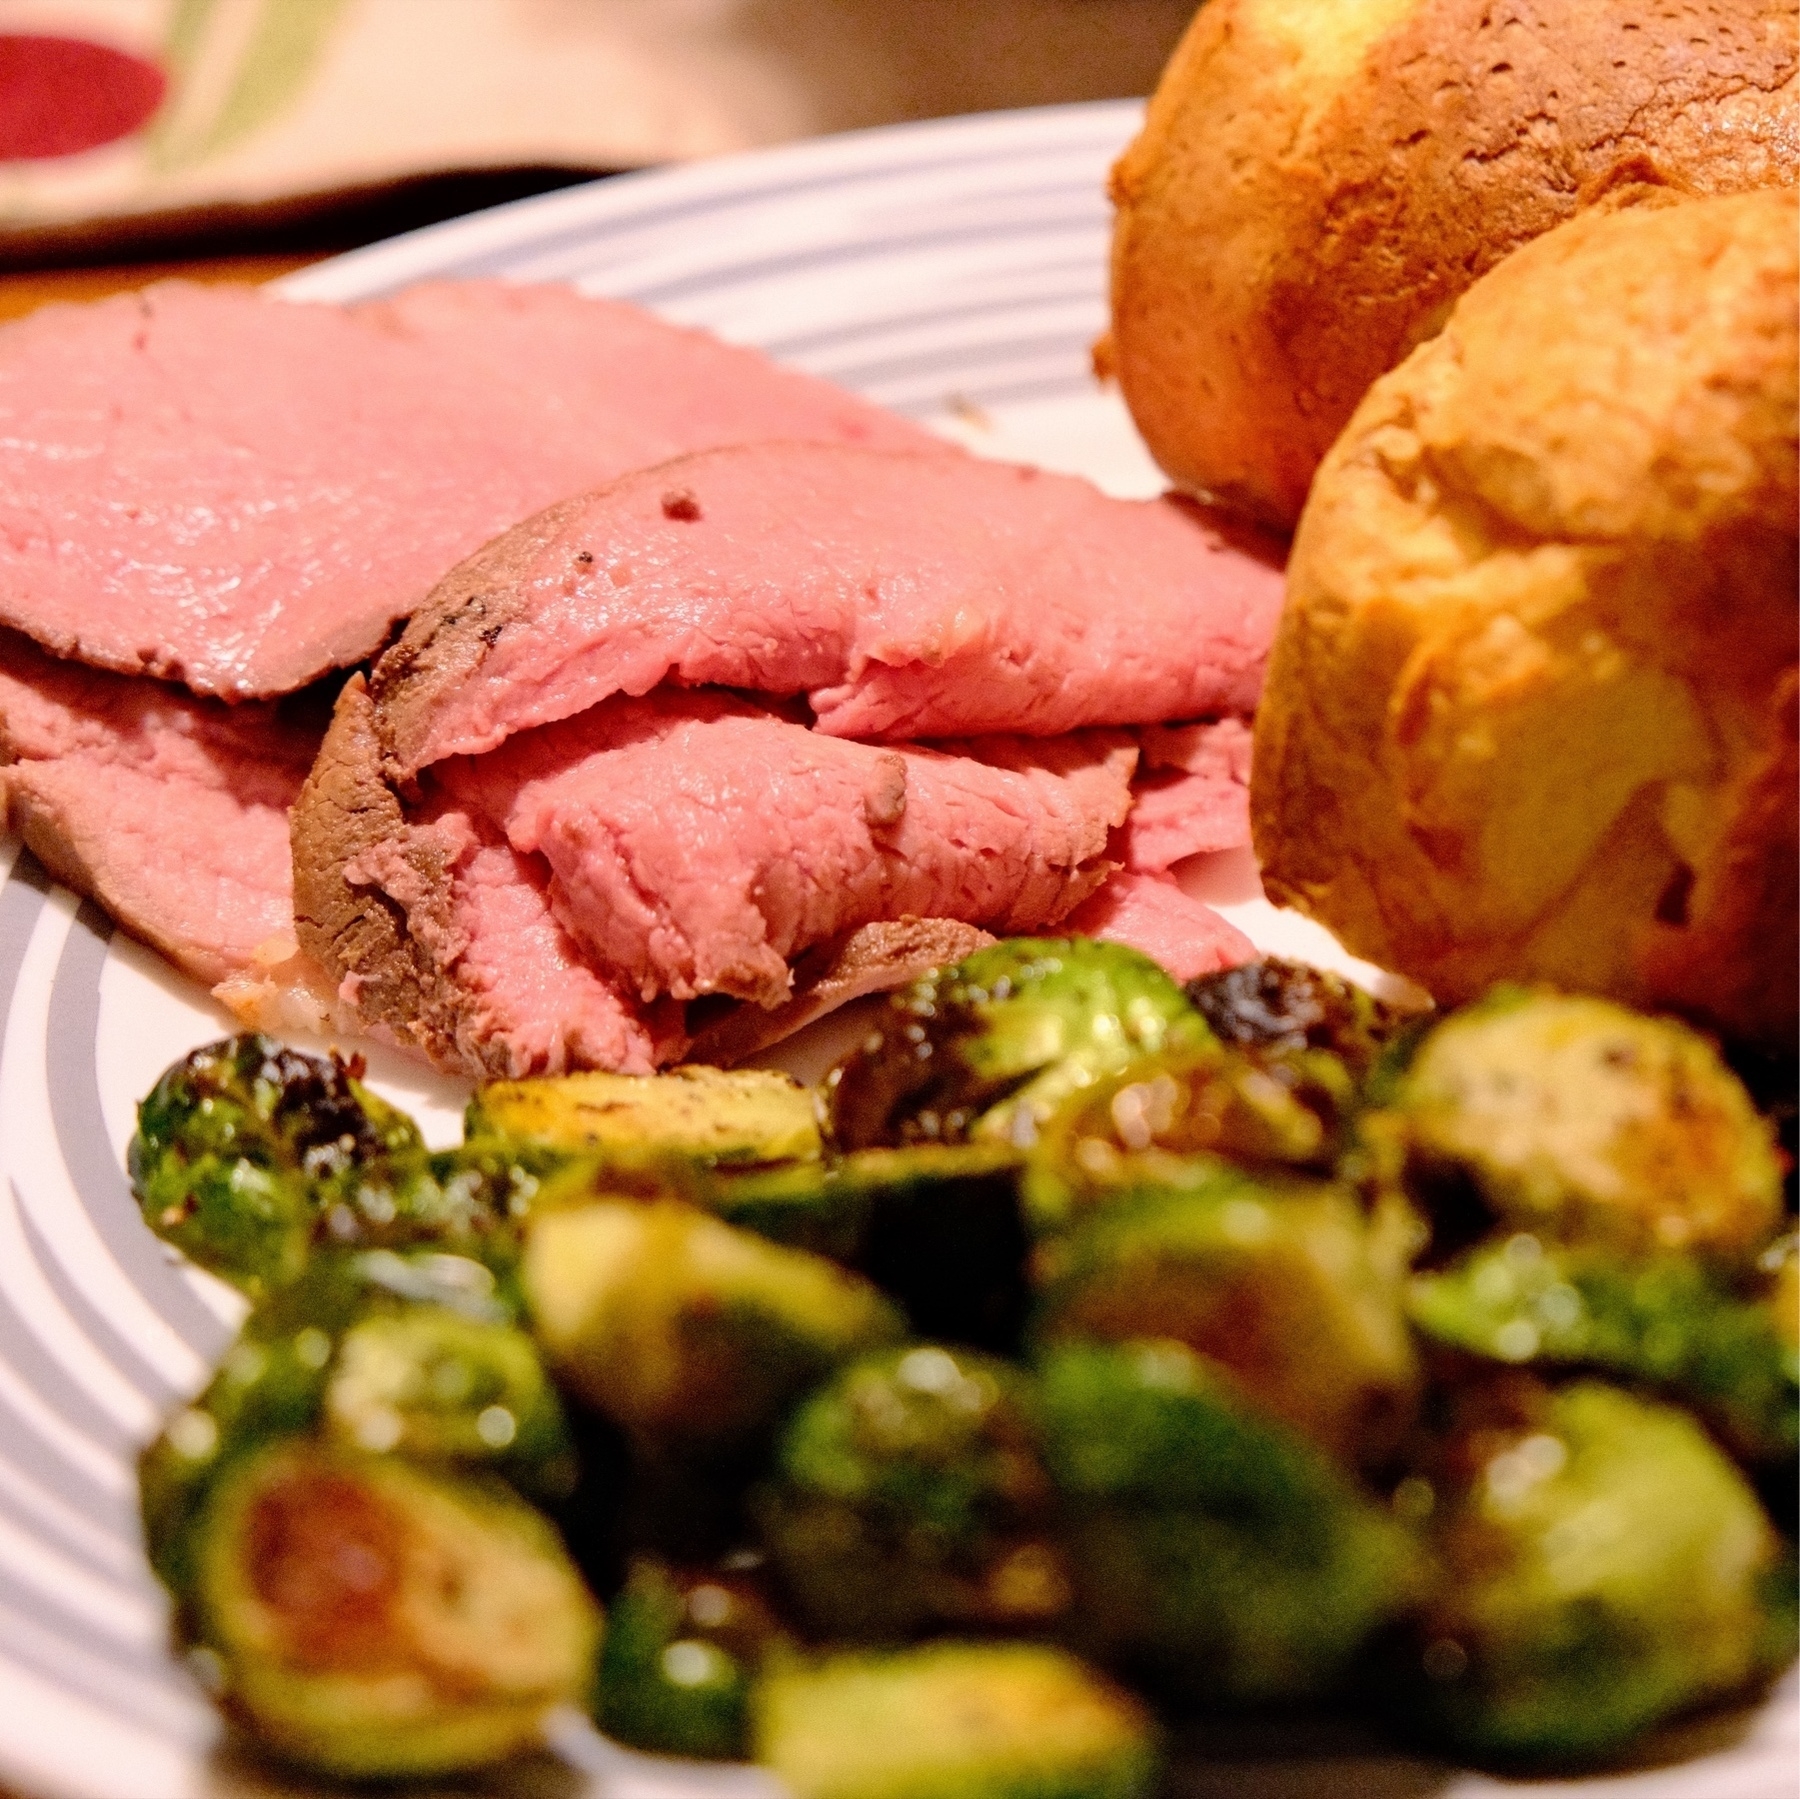 medium rare sliced roast beef with caramelized brussels sprouts and golden brown, crispy popovers